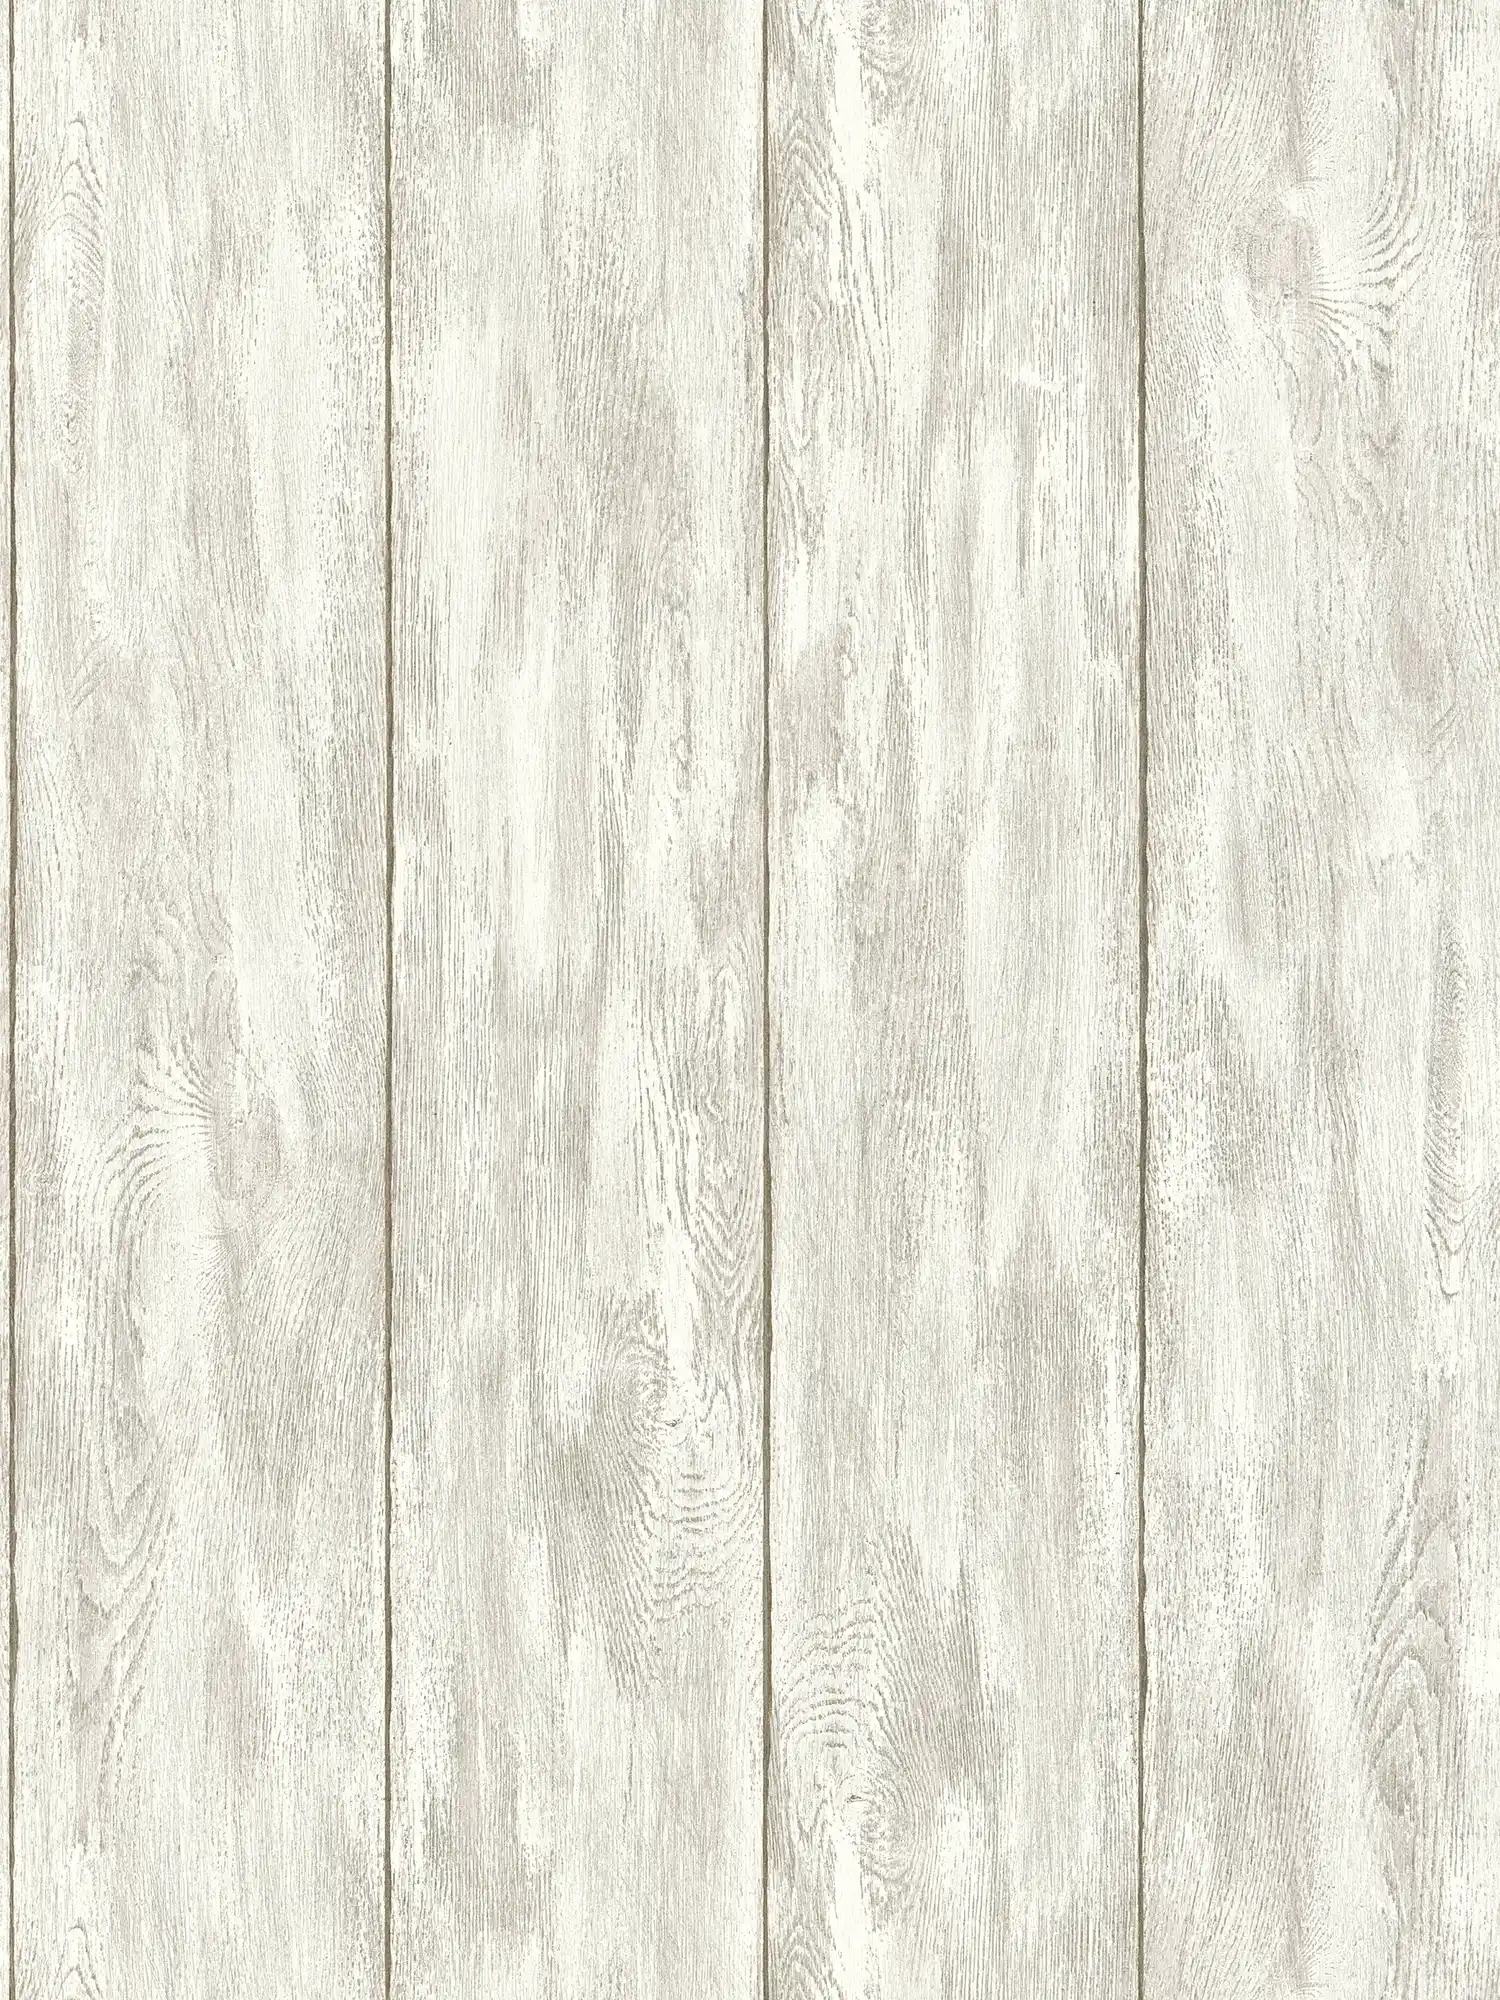         Wallpaper wood look for a cozy country house feeling - beige, cream, grey
    